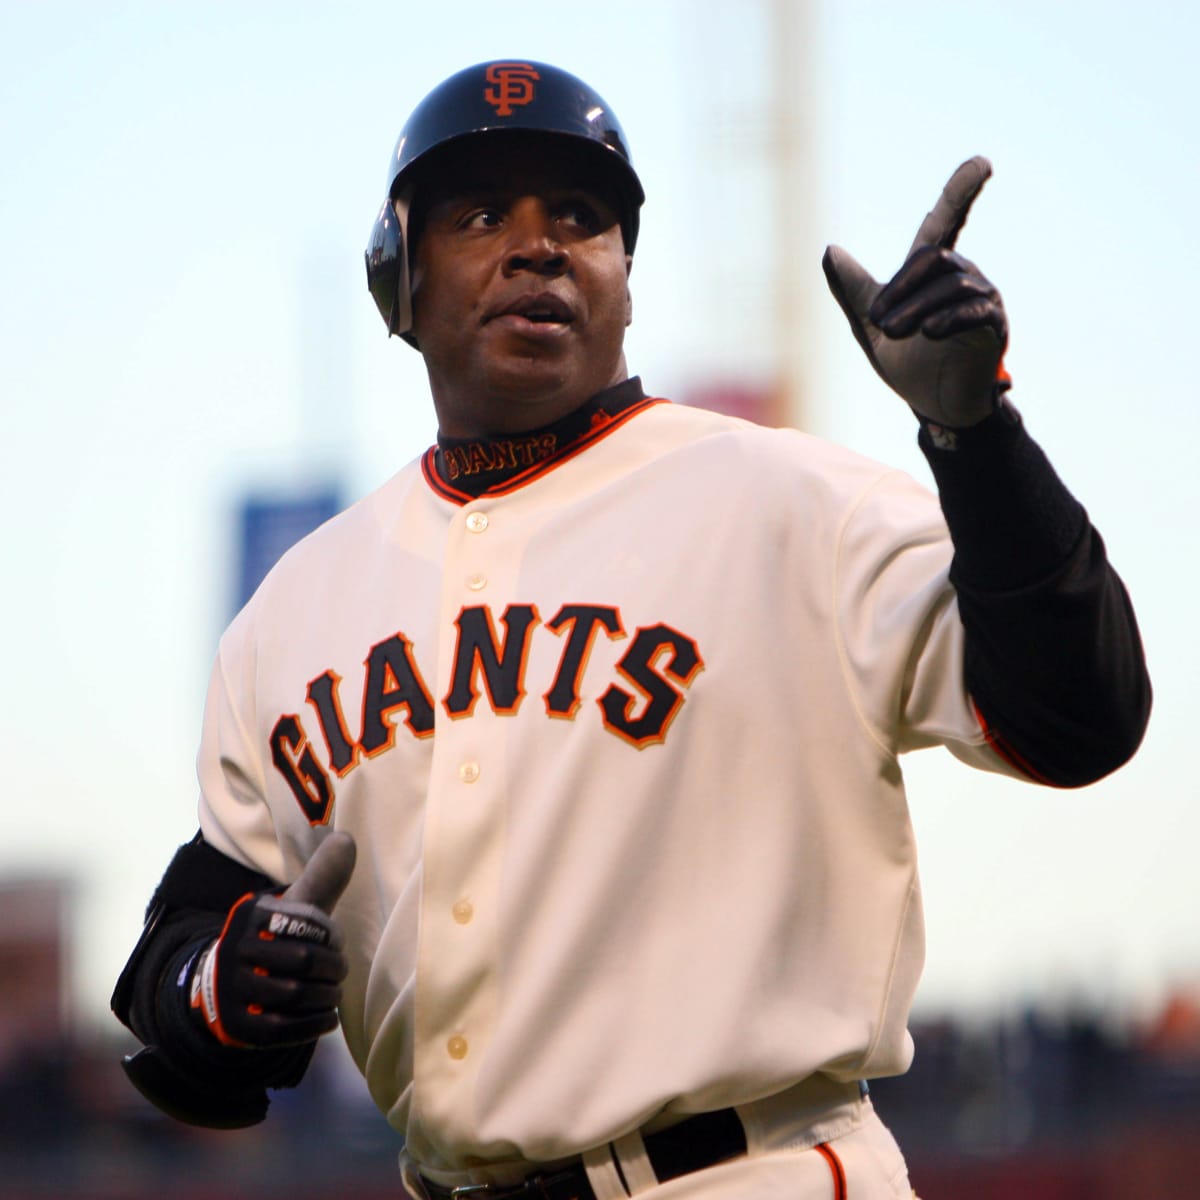 Barry Bonds felt pressure in first season with SF Giants - Sports